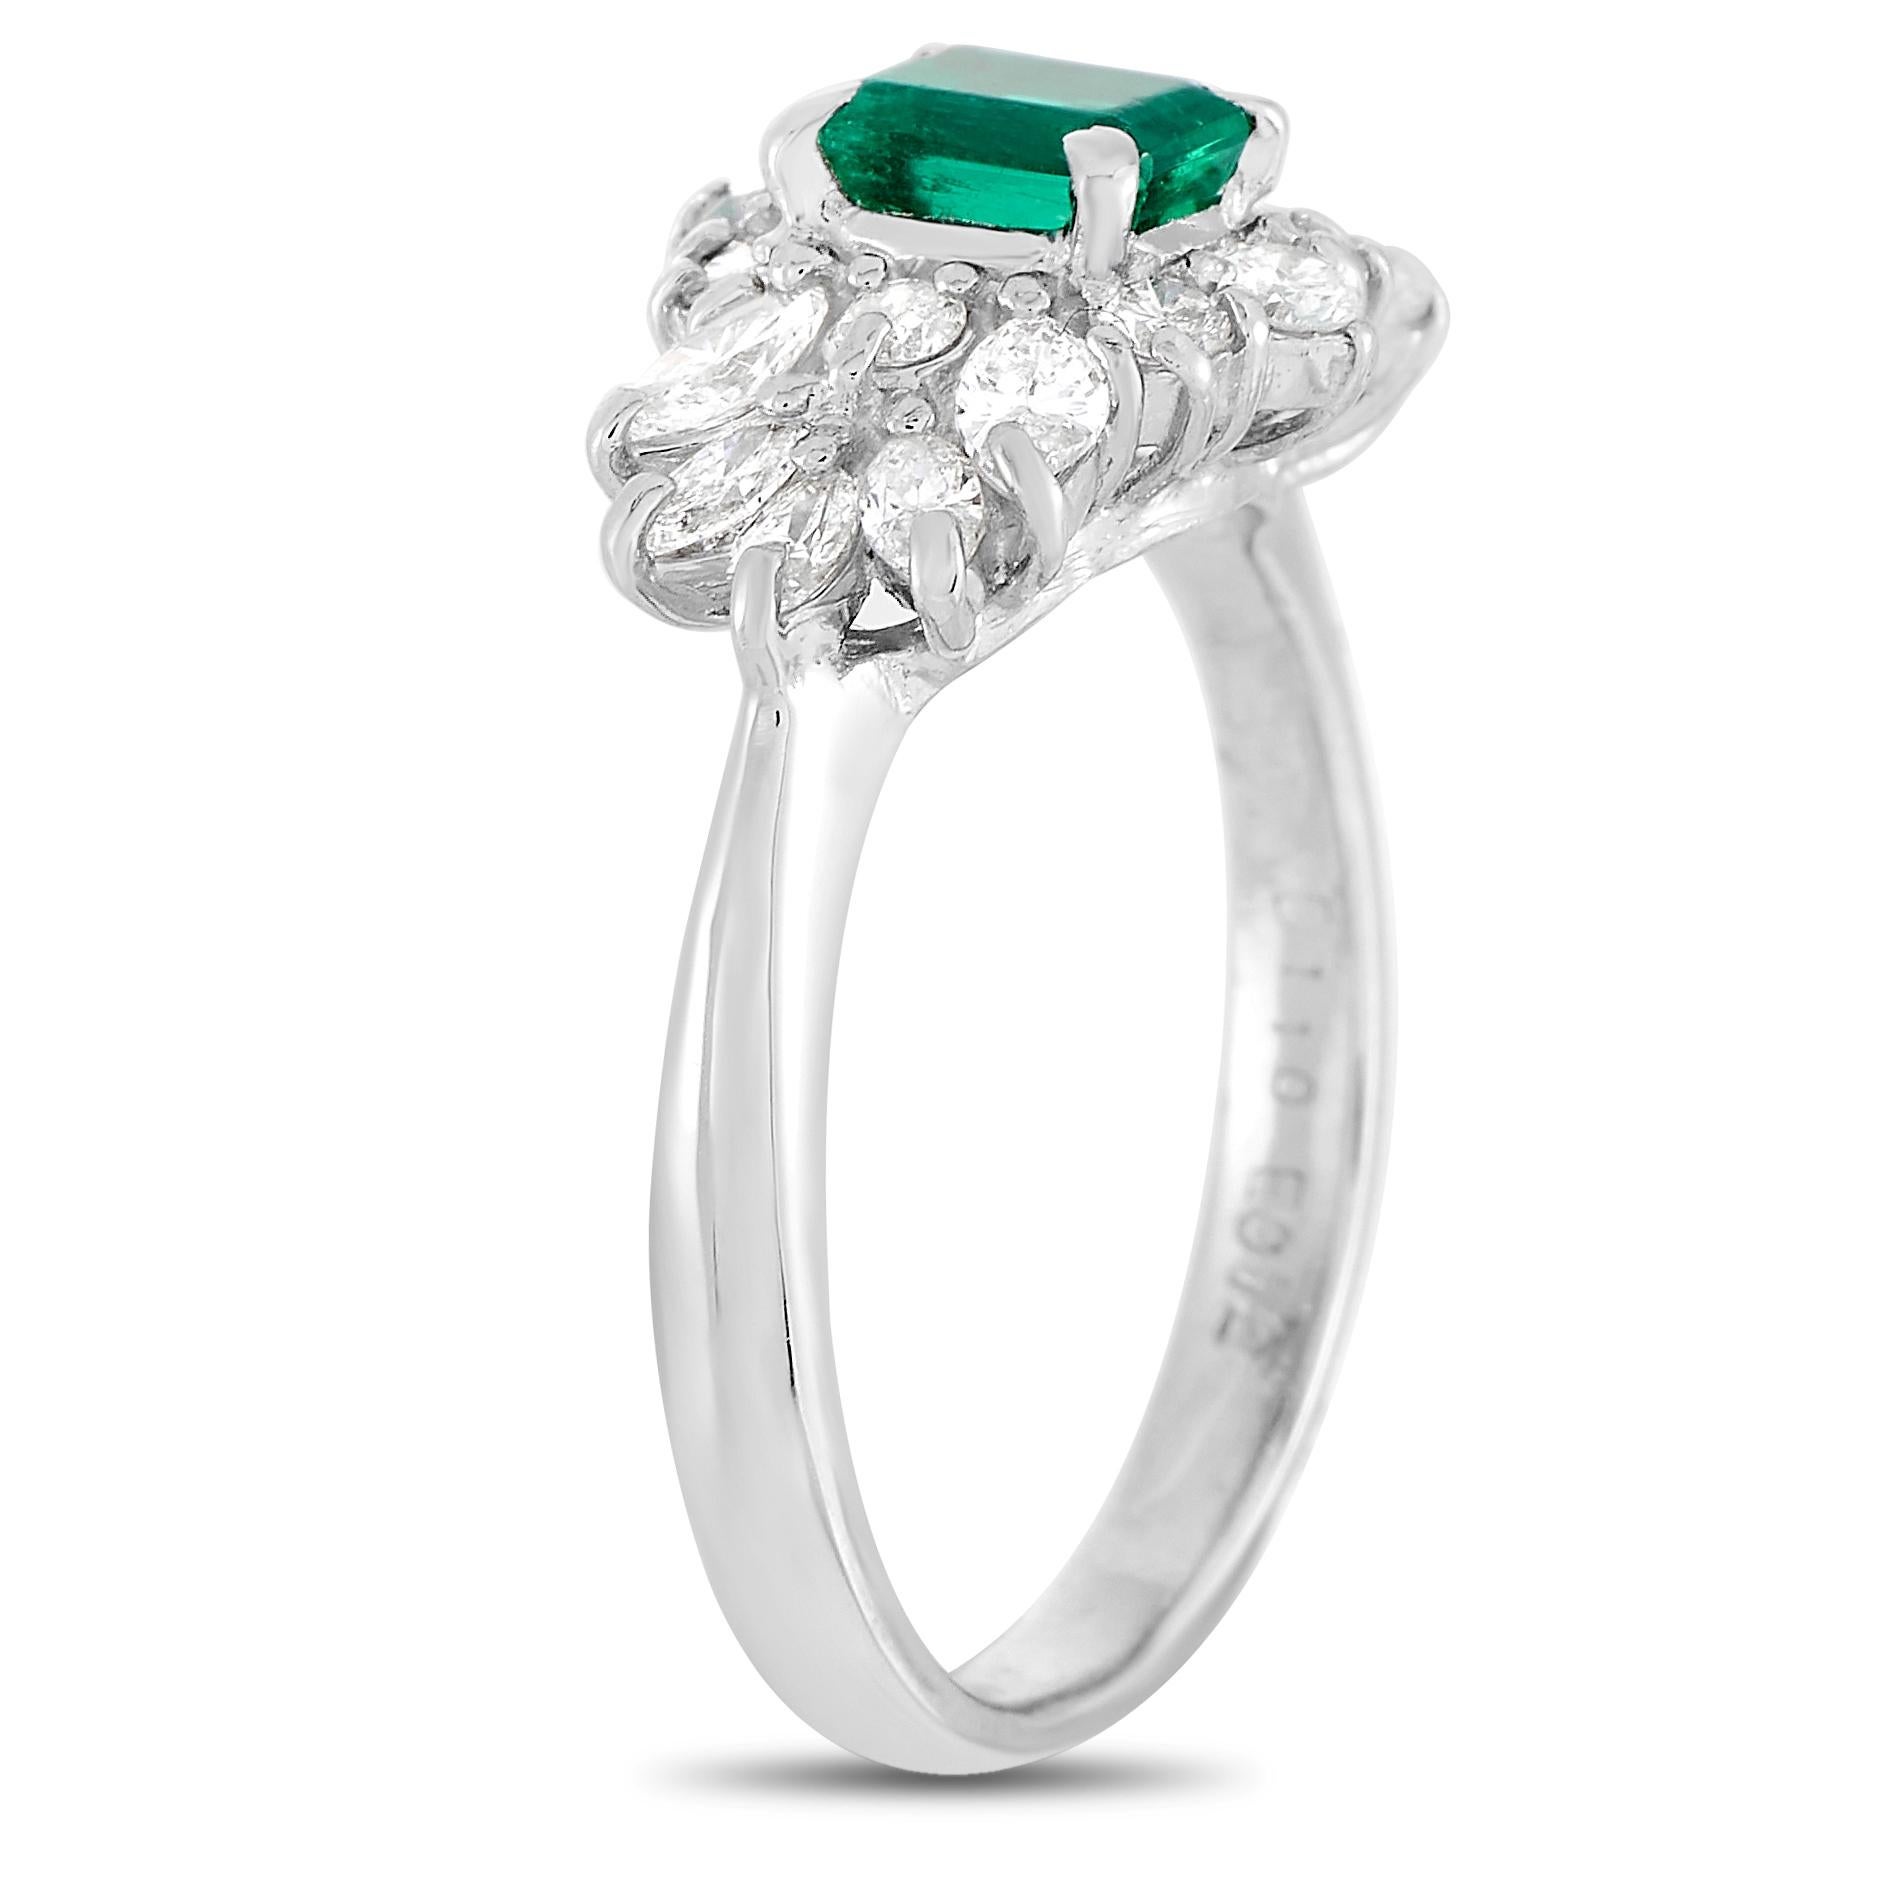 This pretty LB Exclusive Platinum 1.10 ct Diamond and Emerald Ring is made with platinum and set with a total of 1.10 carats of diamonds forming a halo around the 0.72 carat emerald center stone. The ring has a band thickness of 2 mm, a top height